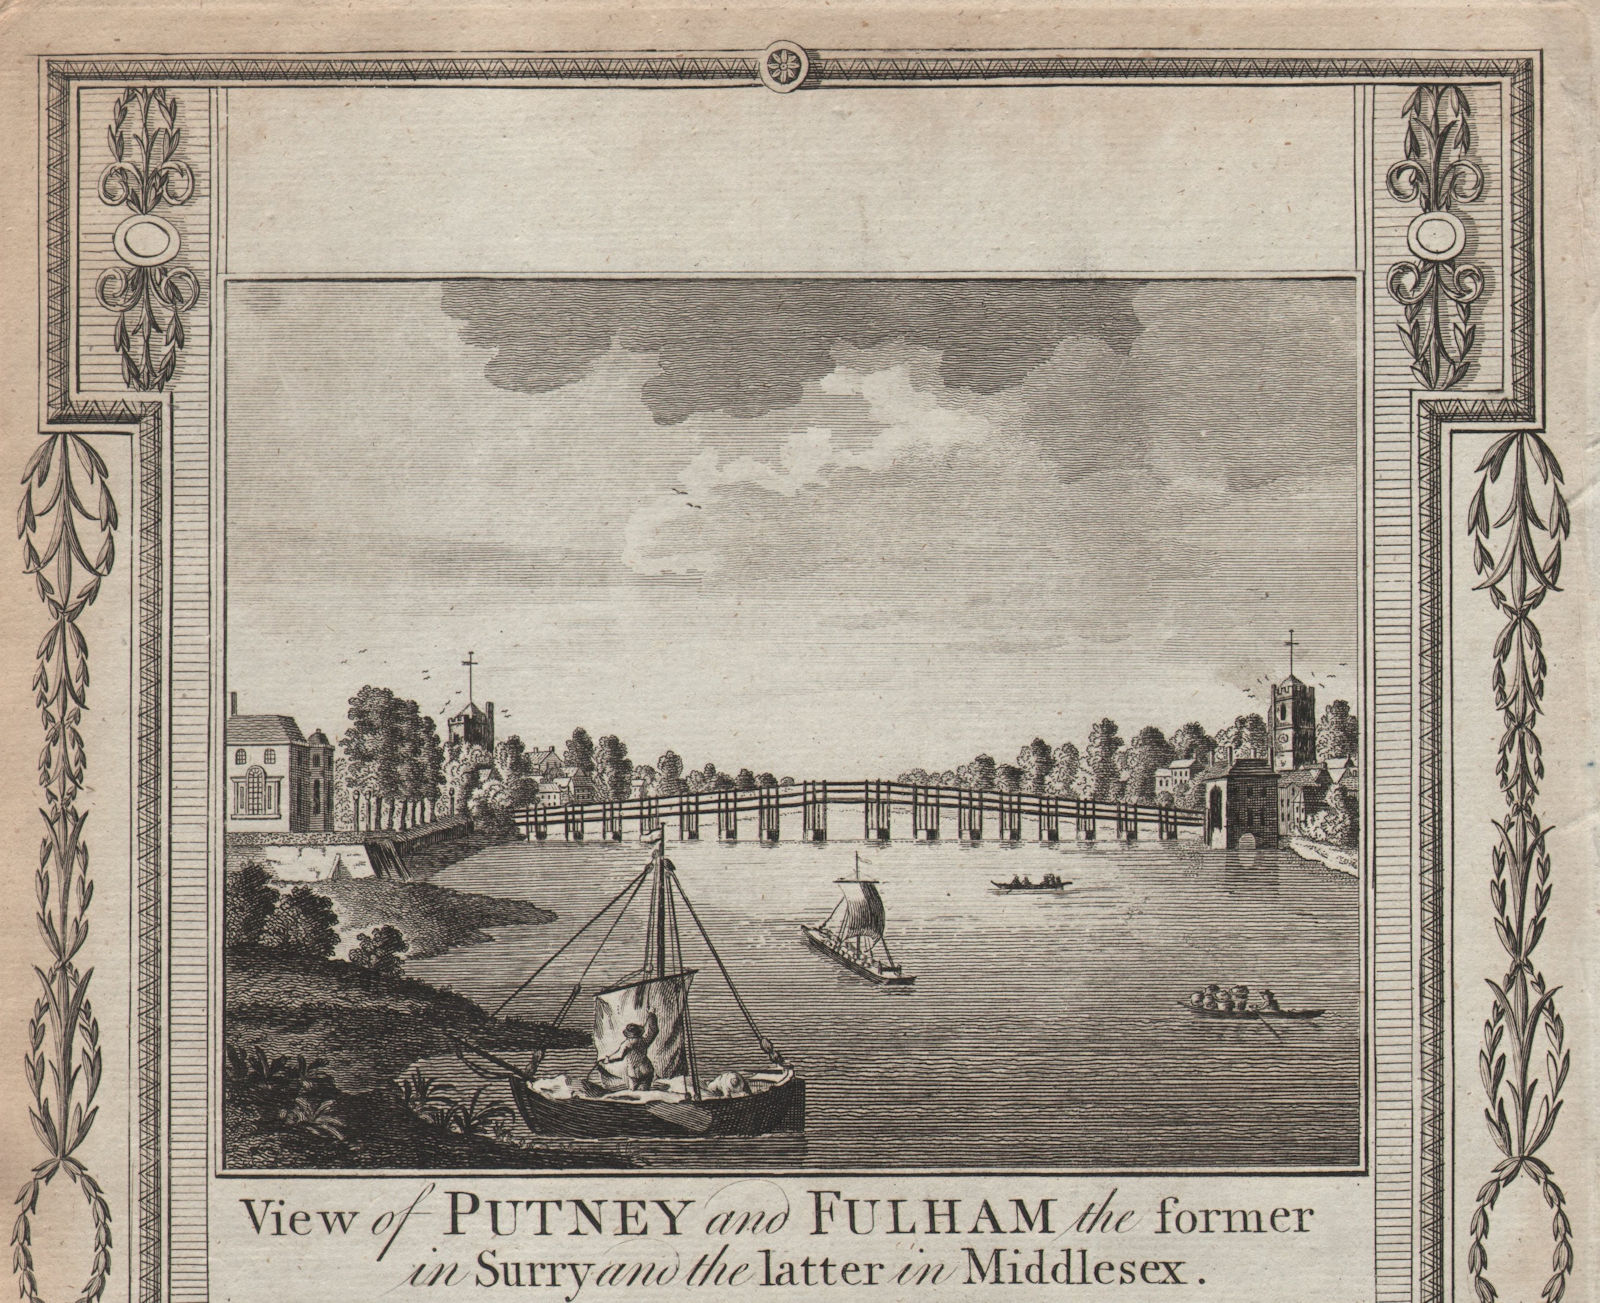 View of Putney and Fulham. St Mary's & All Saints churches. THORNTON 1784